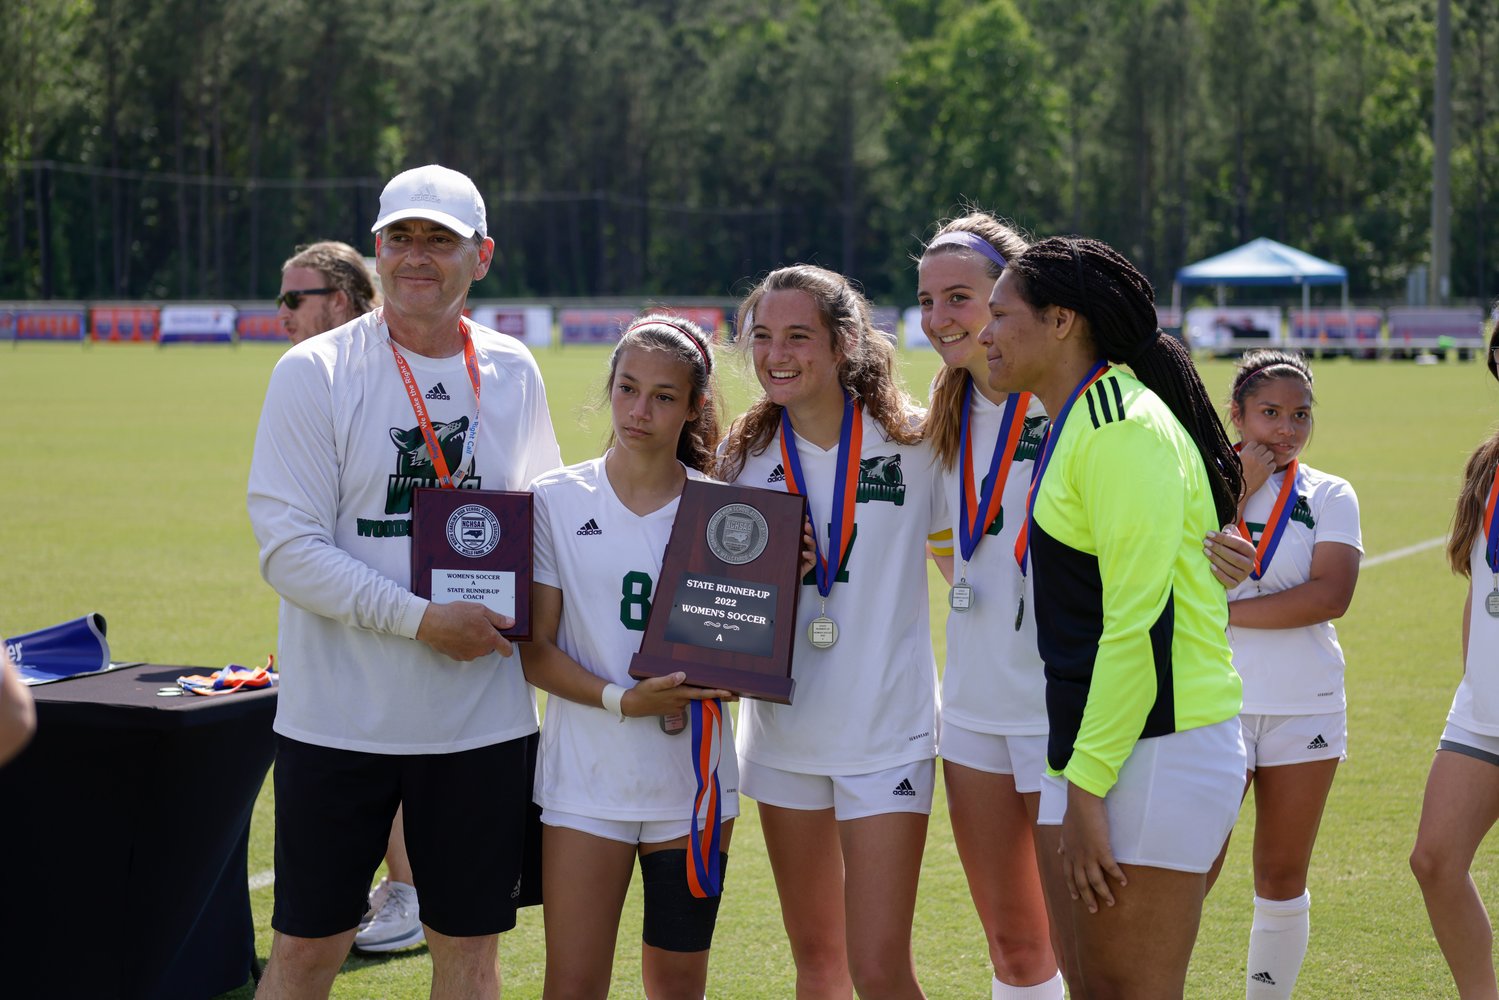 A few members of Woods Charter's women's soccer team (from left to right: head coach Graeme Stewart, sophomore Leyla Noronha, junior Chloe Richard, junior Lucy Miller, senior Jana Matthews) pose with the 1A runner-up trophy after the Wolves' 3-0 loss to the Christ the King Crusaders in the 1A state title game last Saturday in Cary.